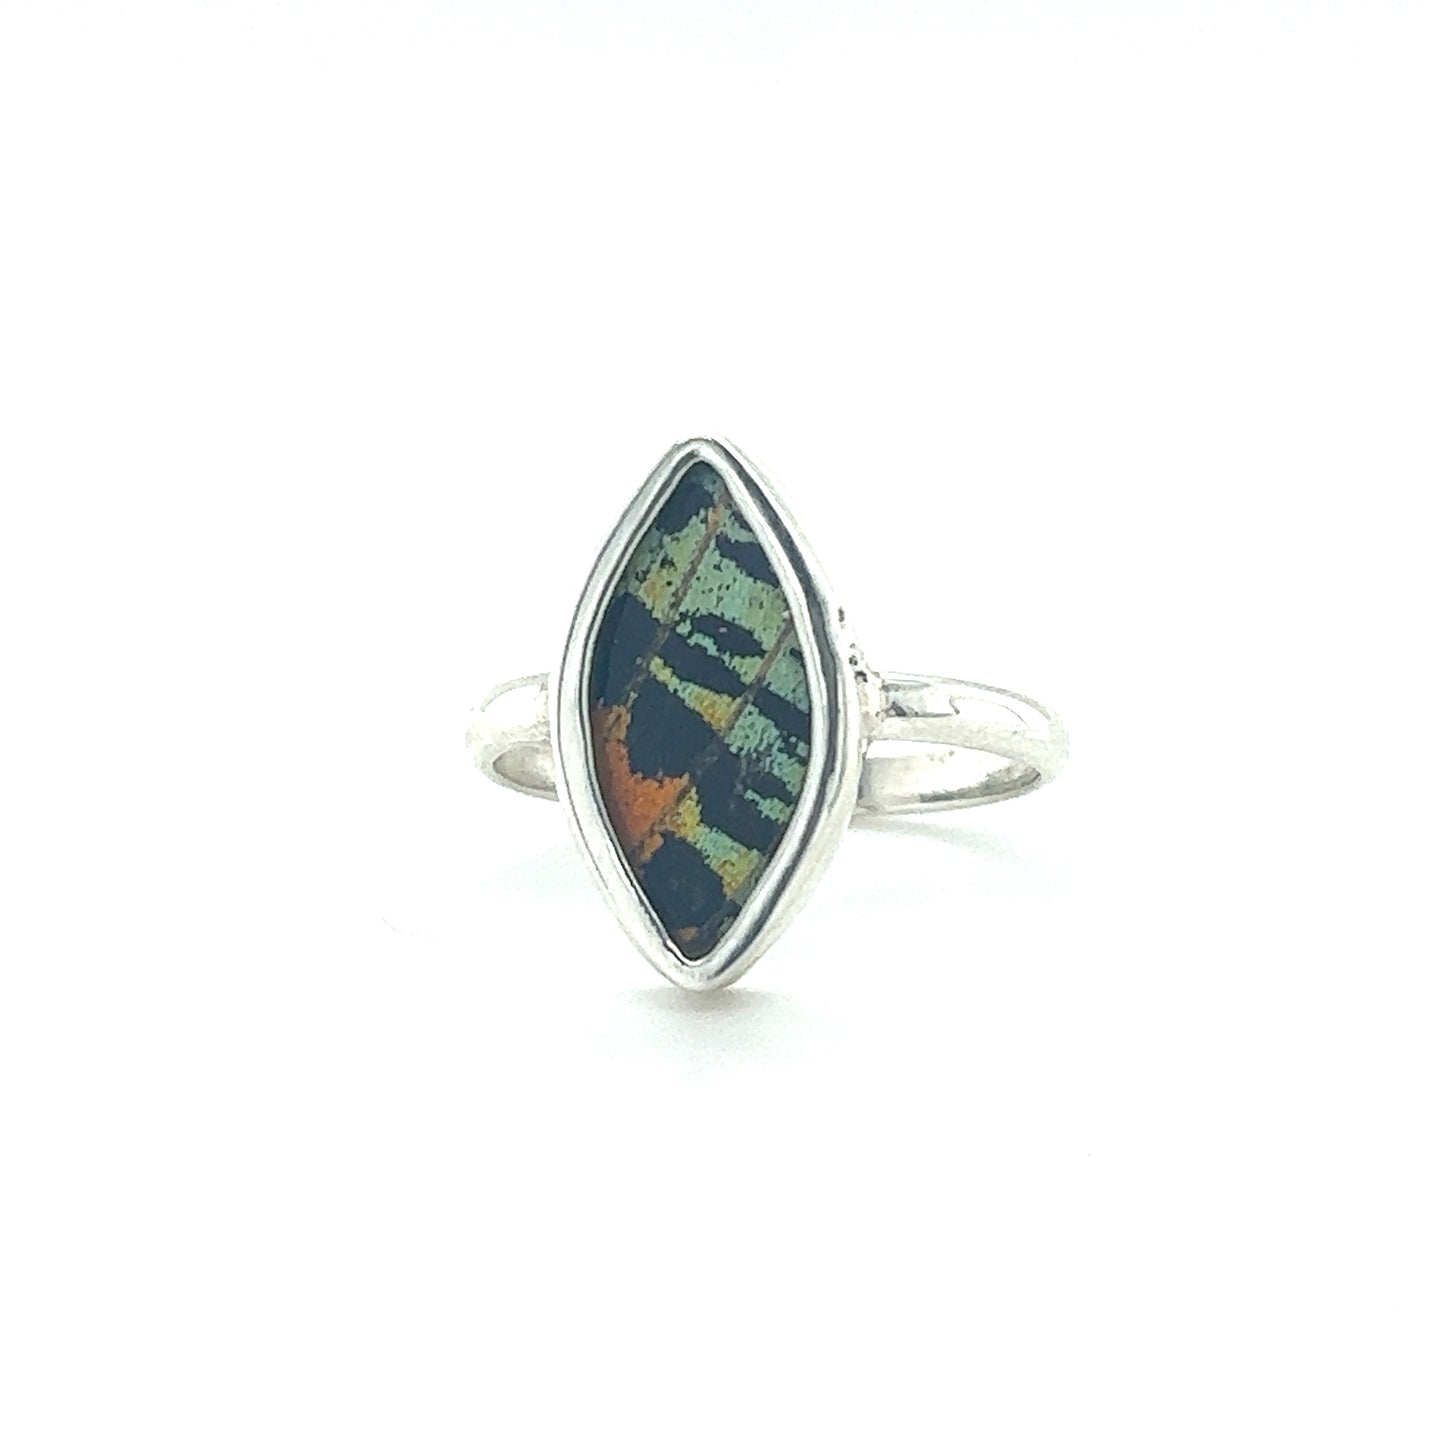 A sustainable fashion Genuine Butterfly Wing Ring in Marquise Shape with a black and green stone.